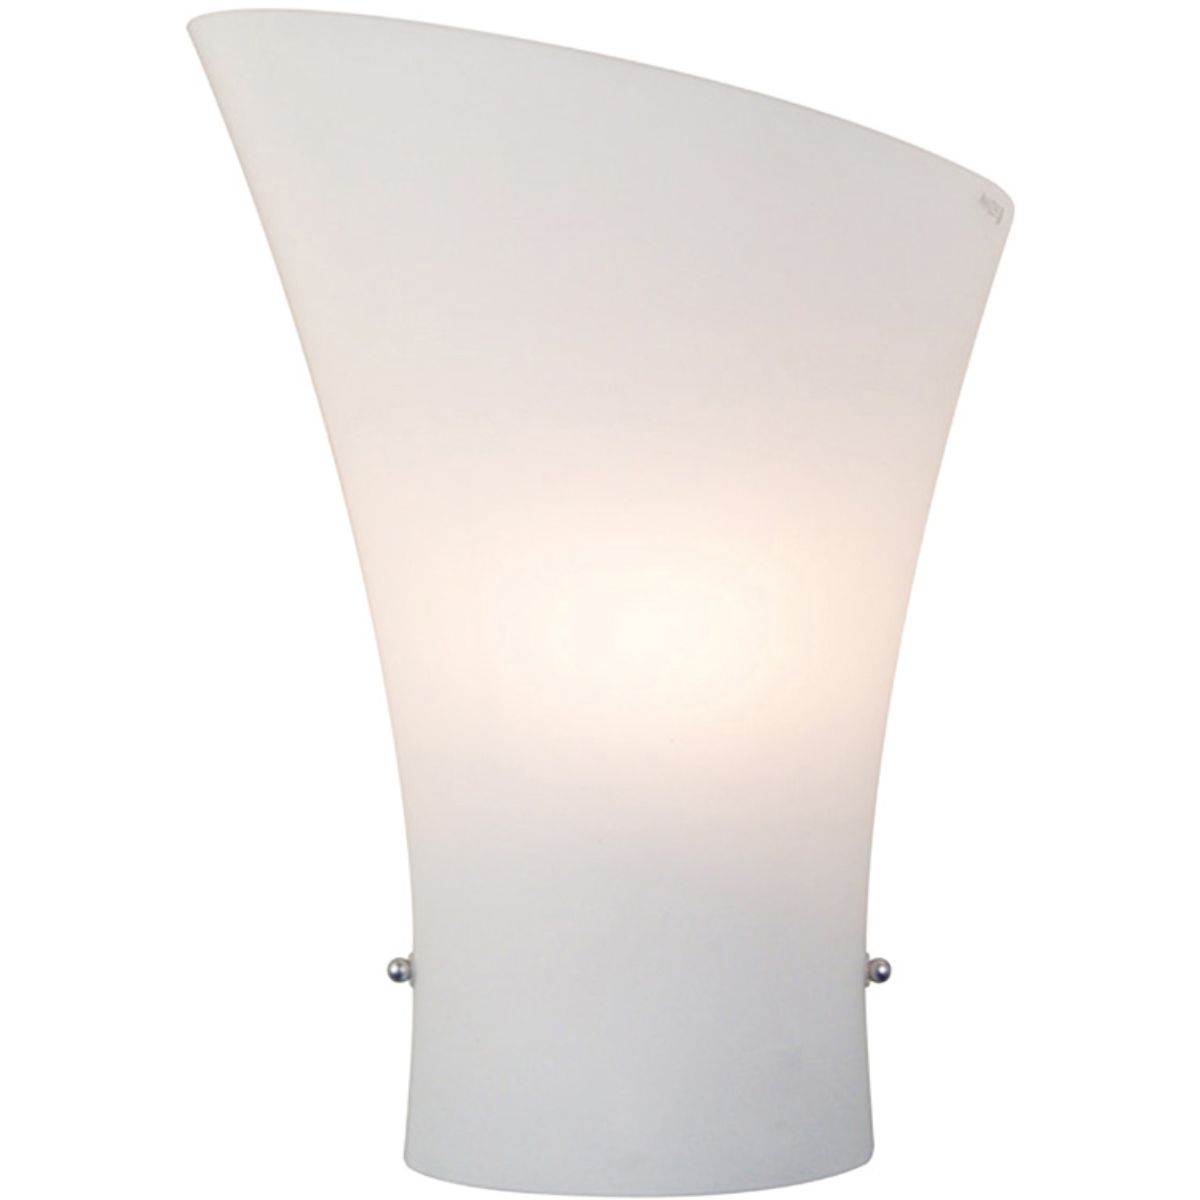 Conico 12 in. Flush Mount Sconce Nickel Finish